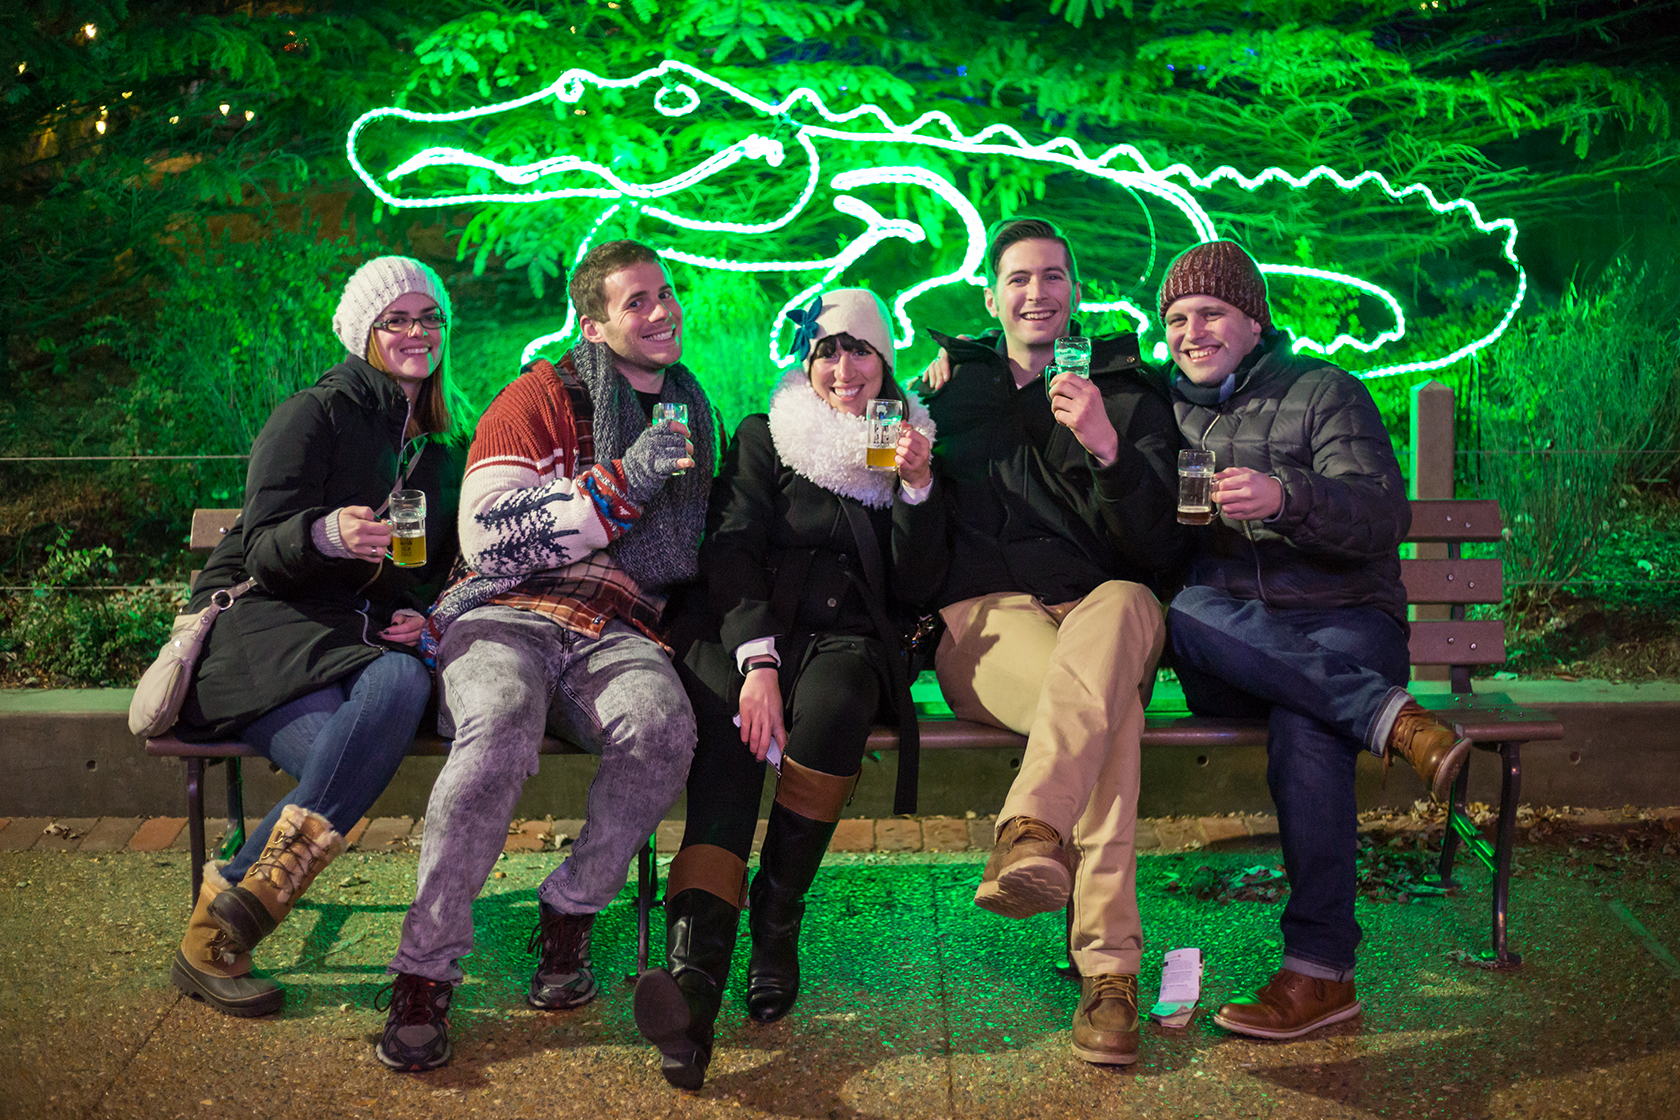 BrewLights at Lincoln Park - Presented by Lakeshore Beverage